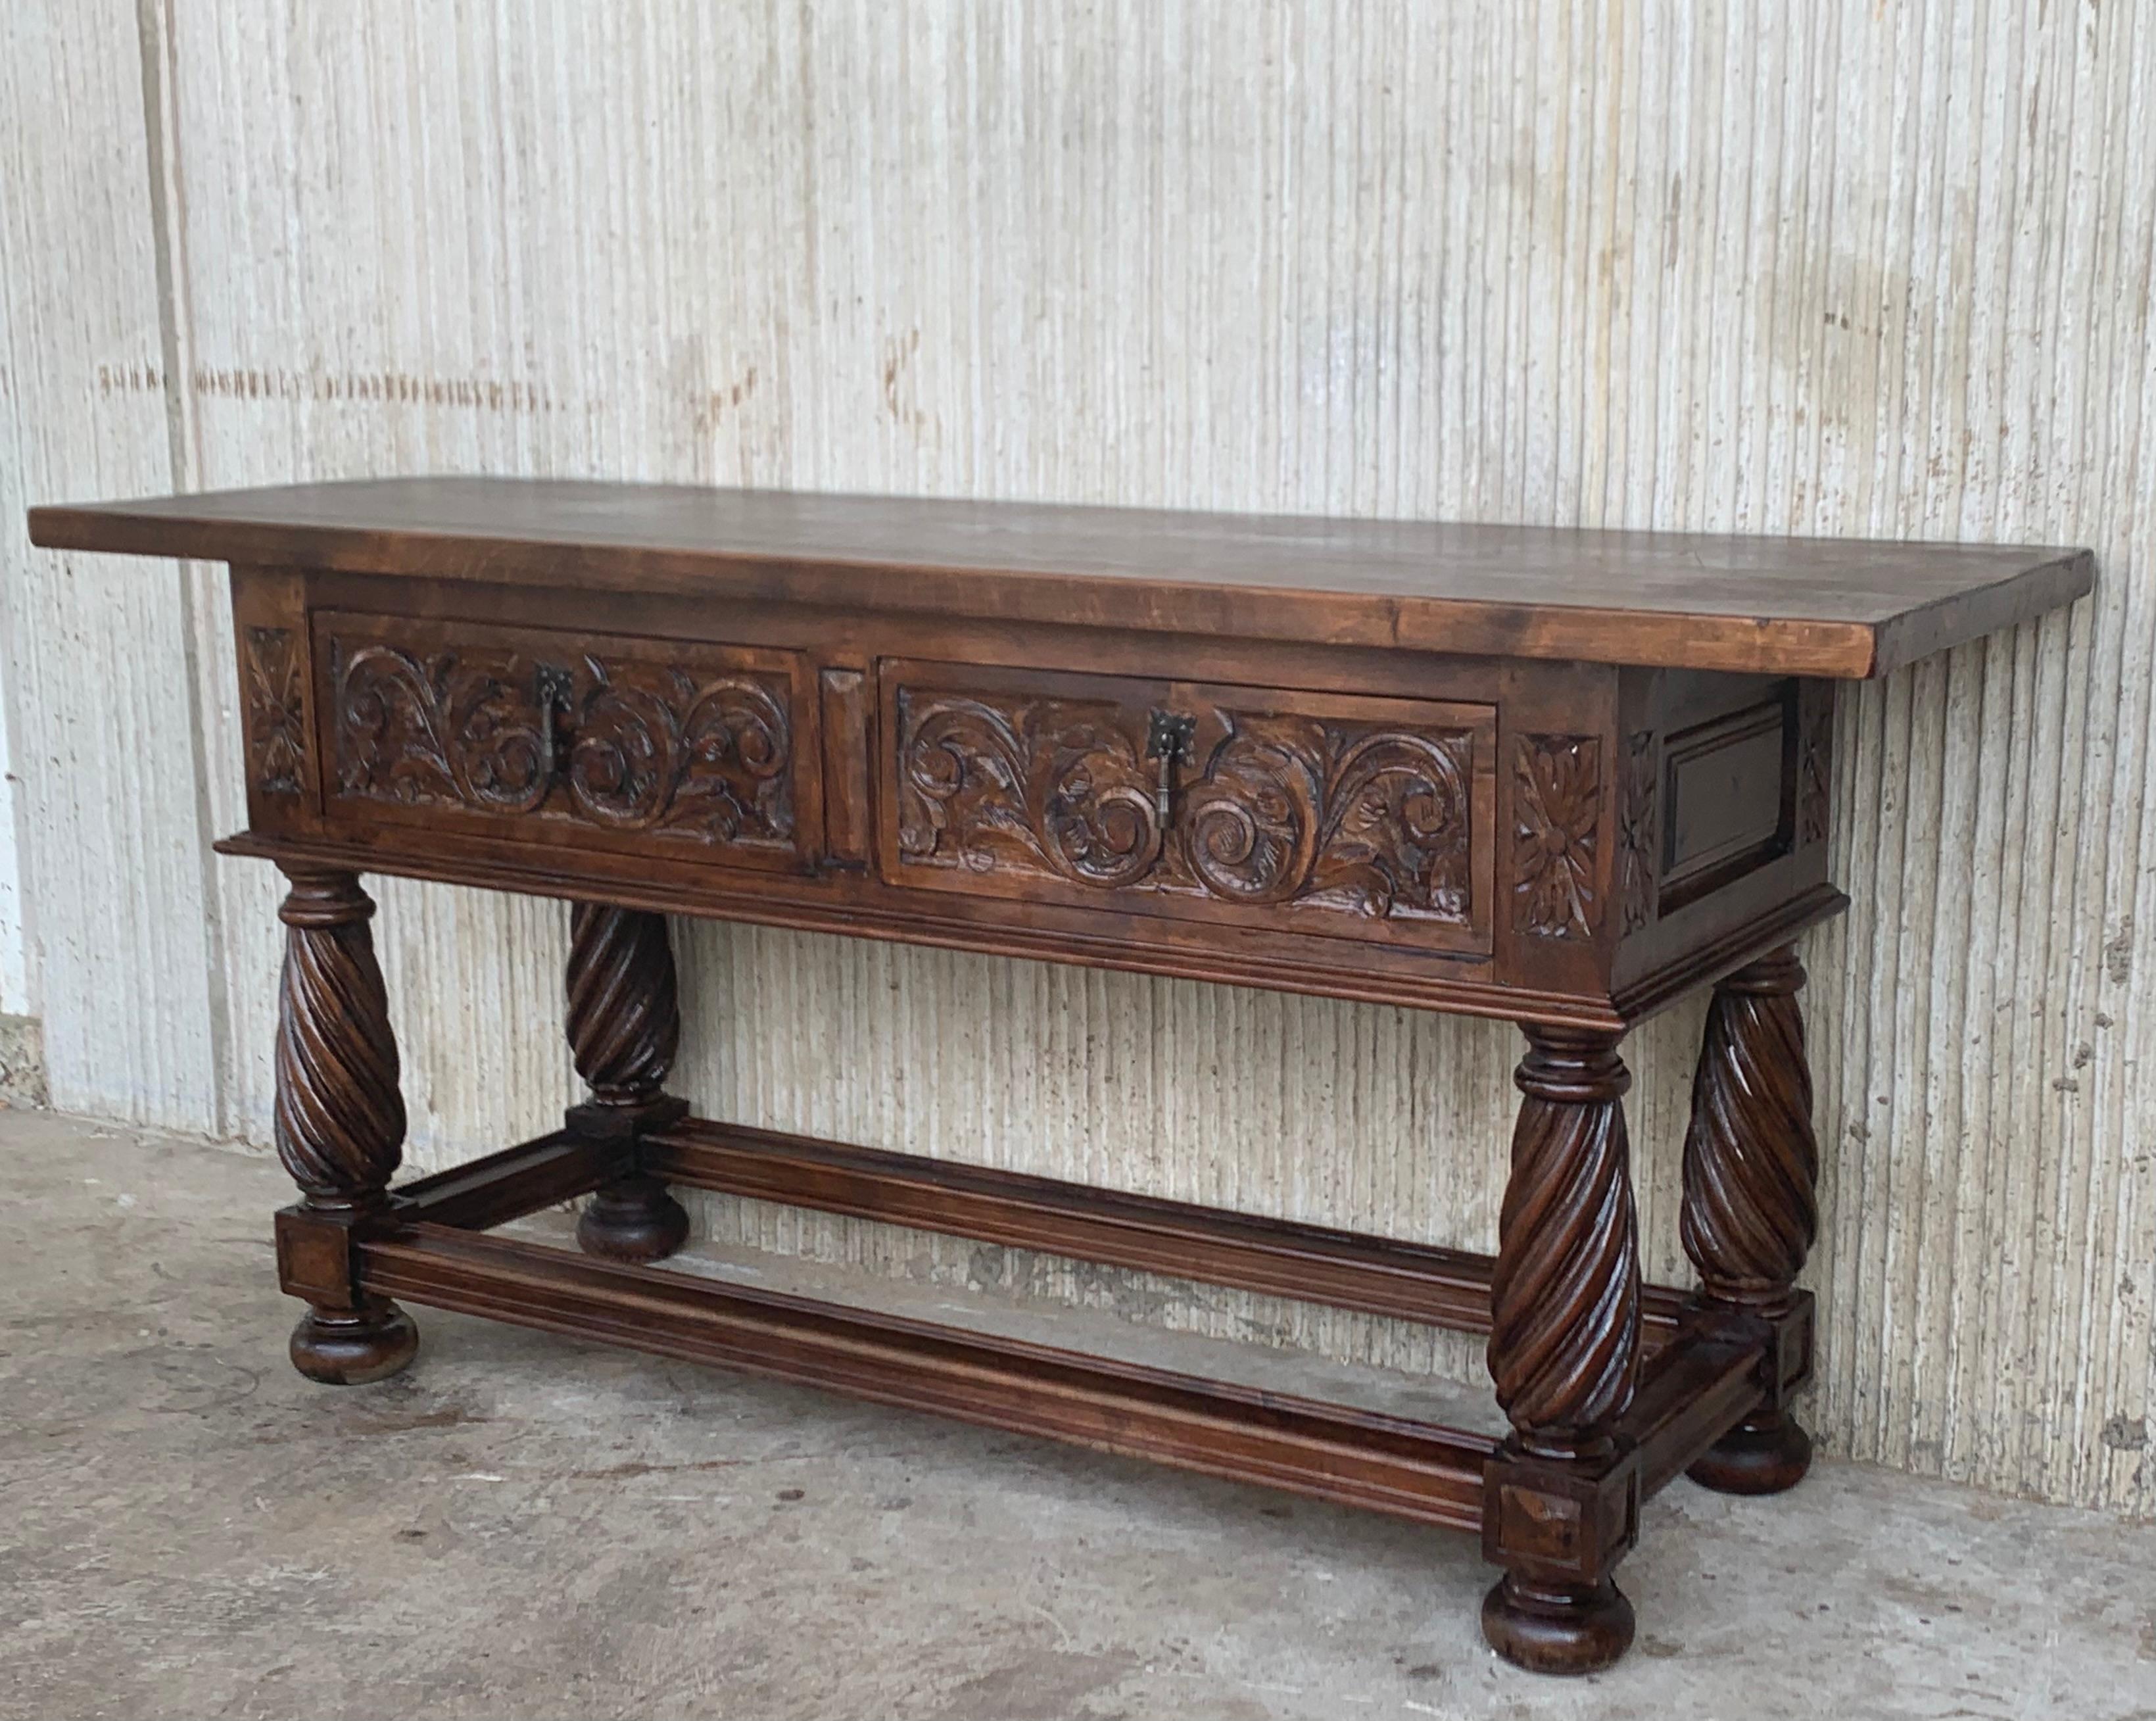 This large Spanish late 19th century features a beautiful one plank rectangular top over two carved drawers. Each drawer, featuring slightly different hardware, is adorned with geometrical motifs. Rosettes are carved between the drawers and each